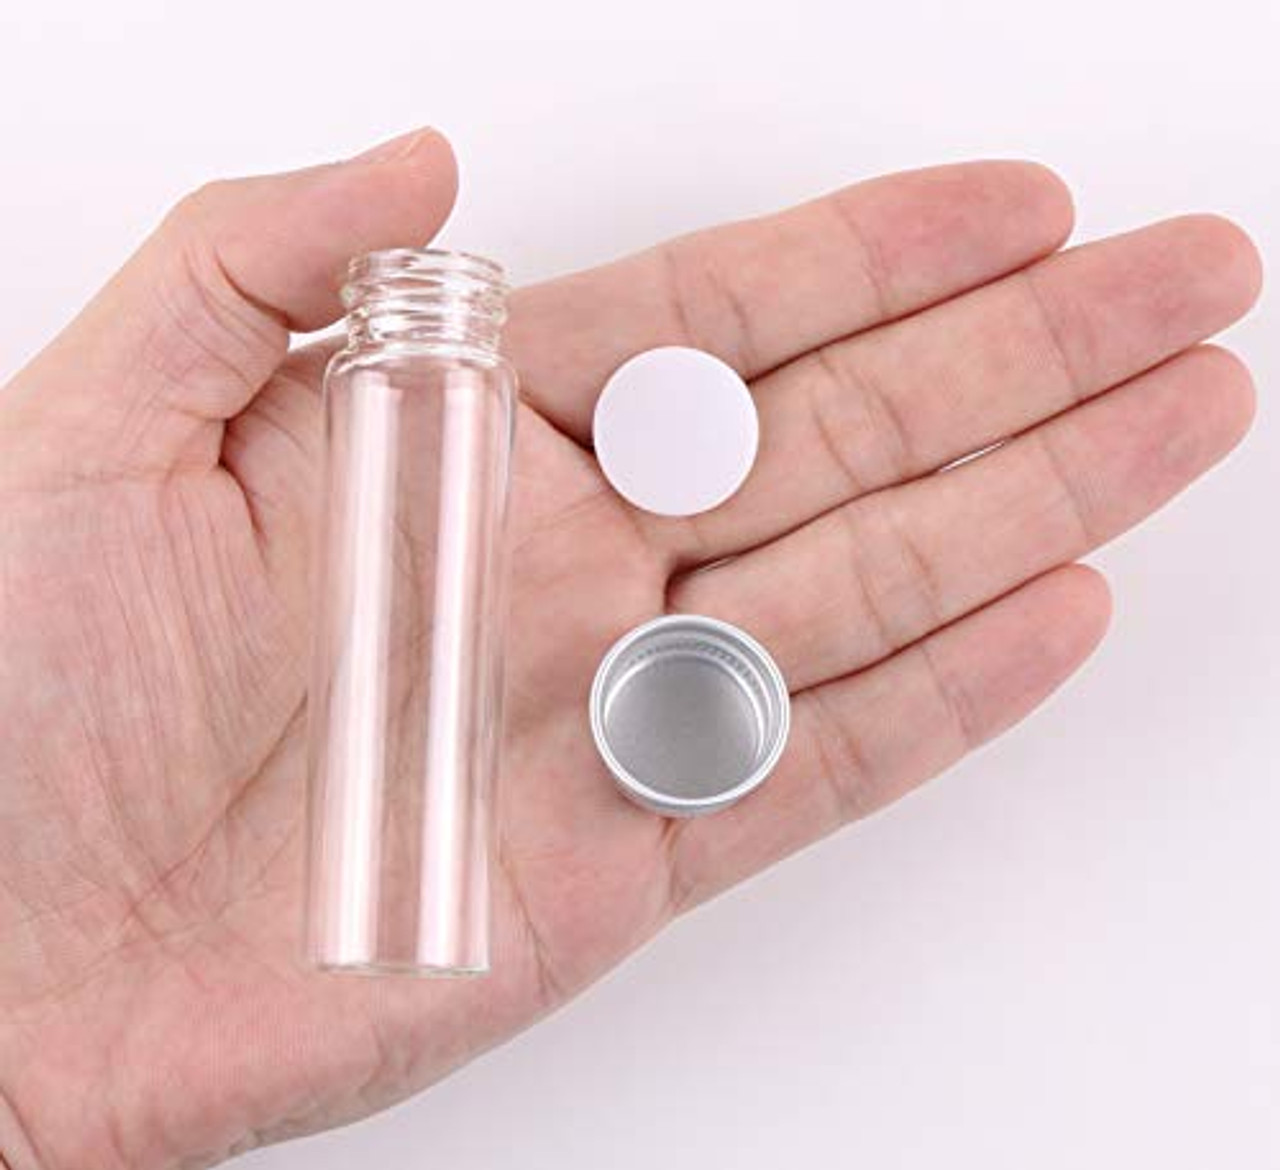 MaxMau Small Glass Bottles with Aluminum Screw lids Clear 20